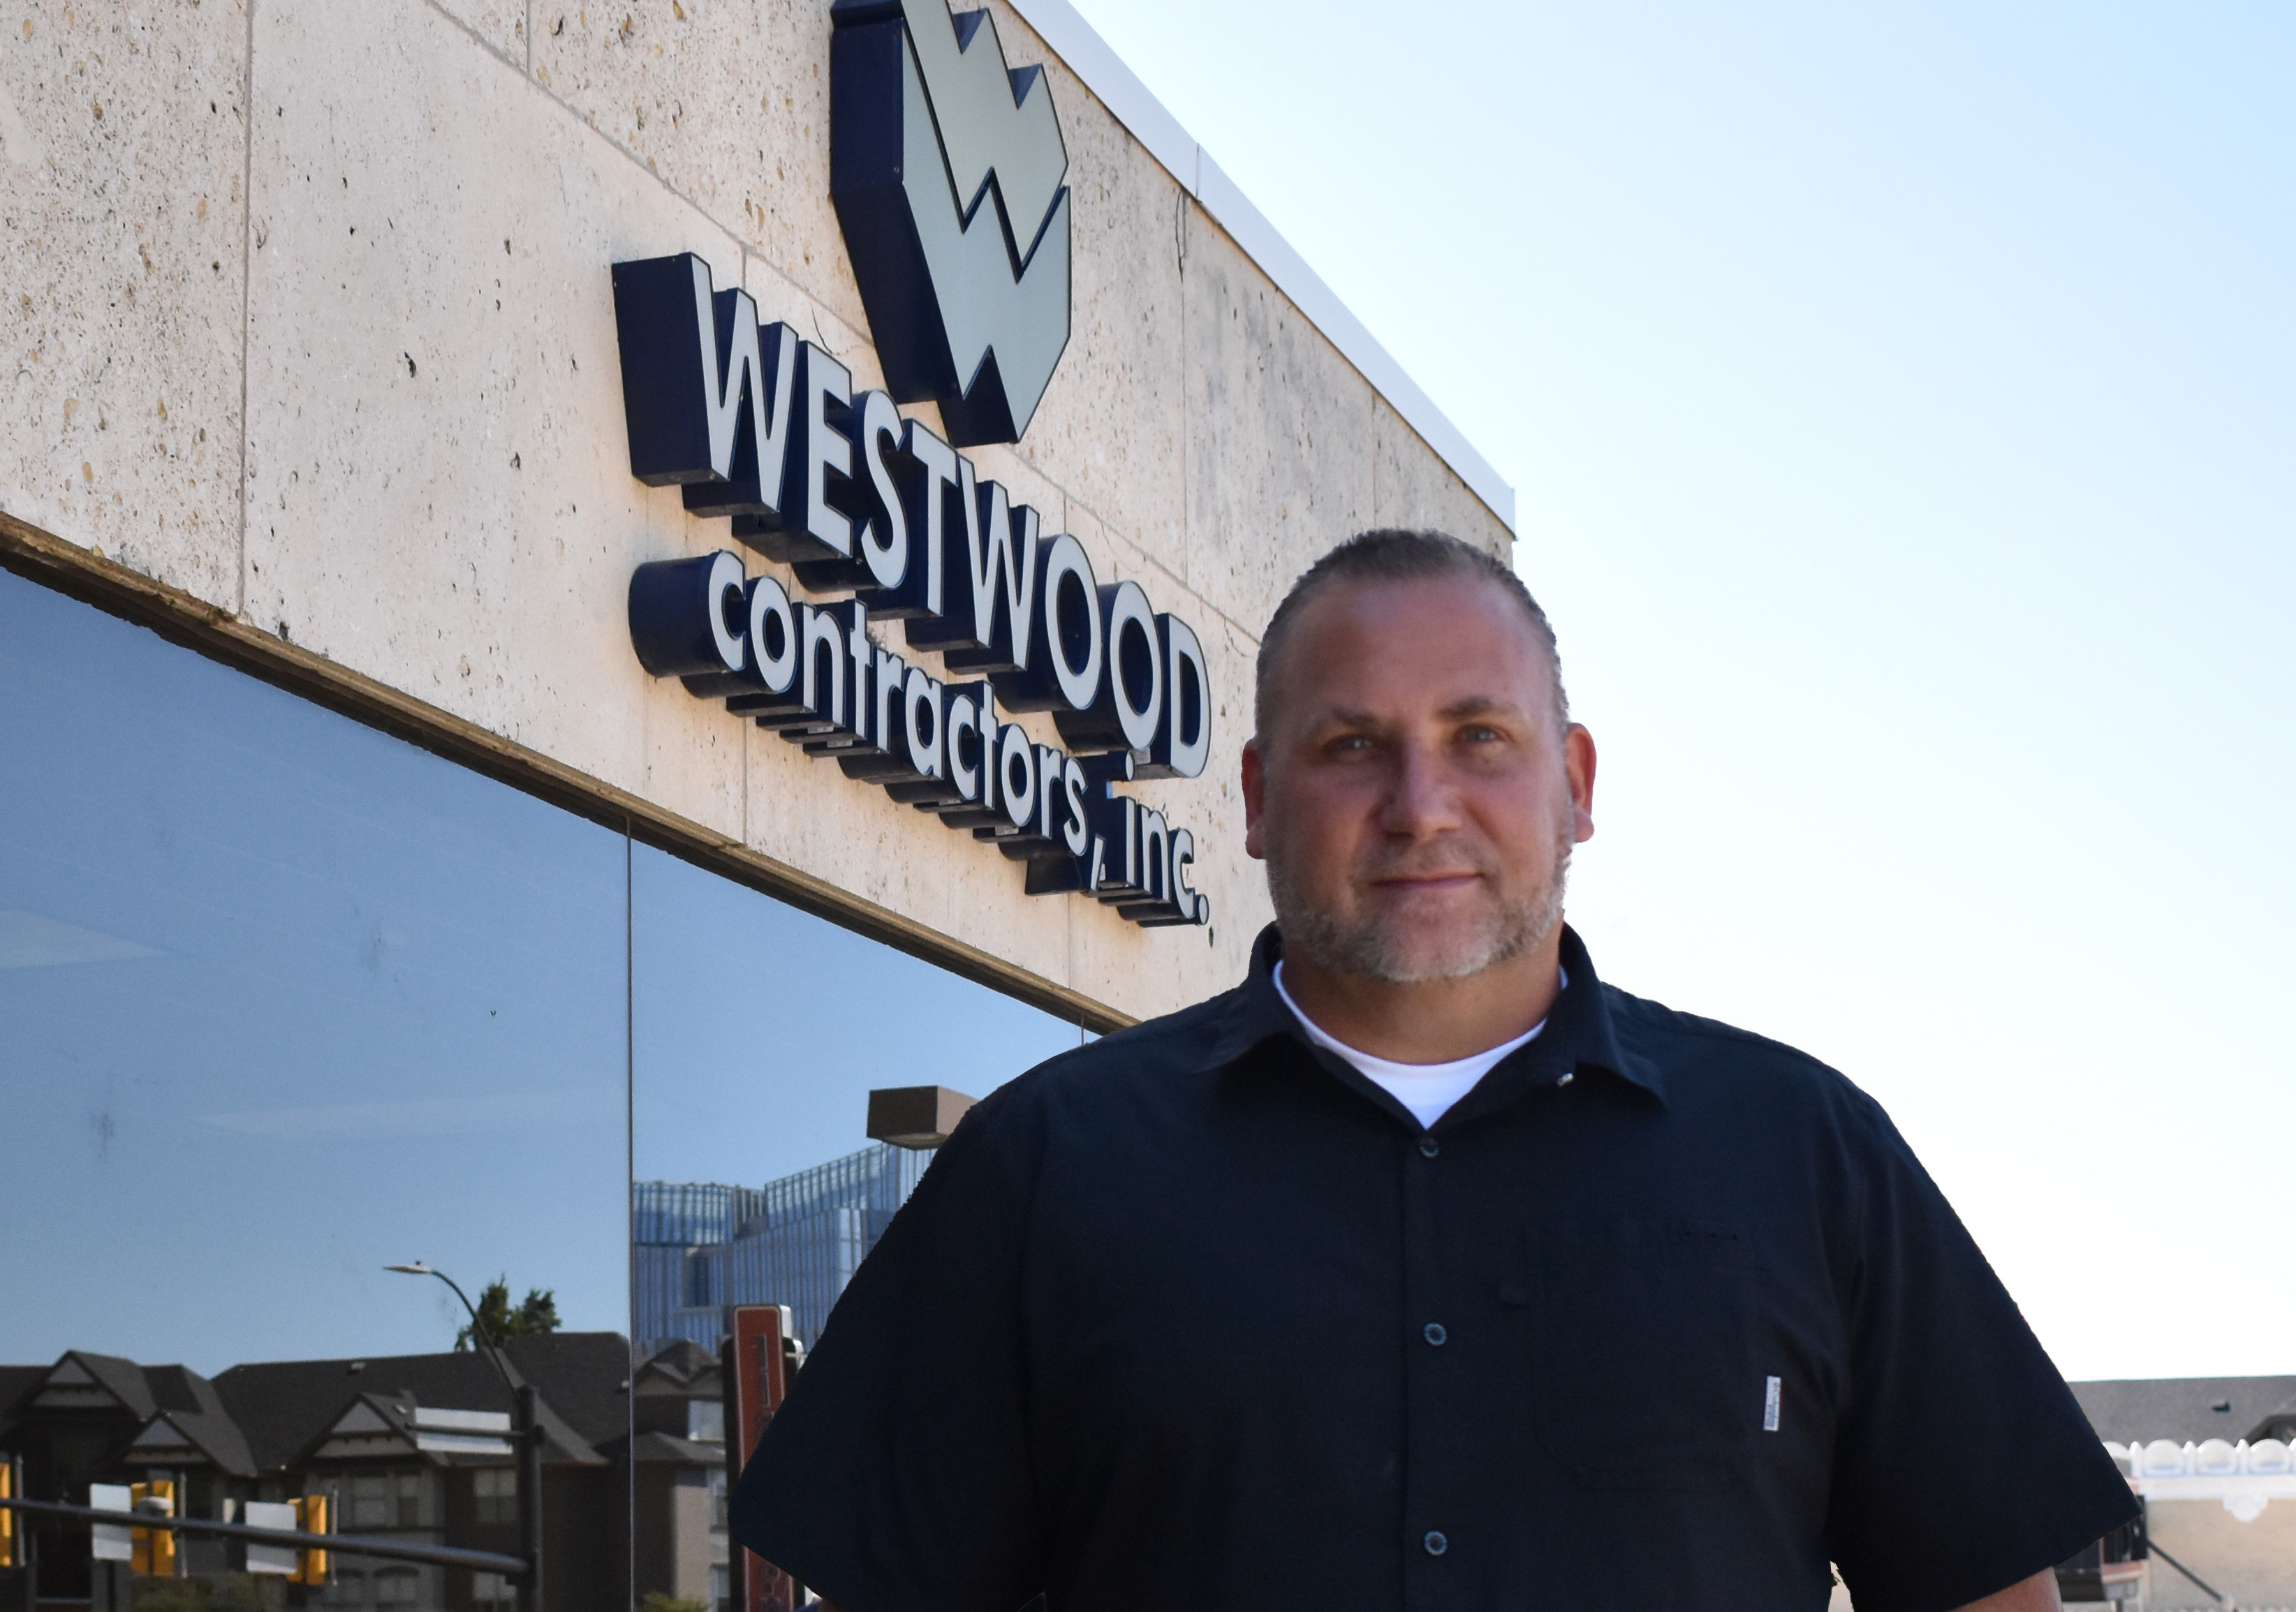 Mike Roop joins Westwood as Director of Operations